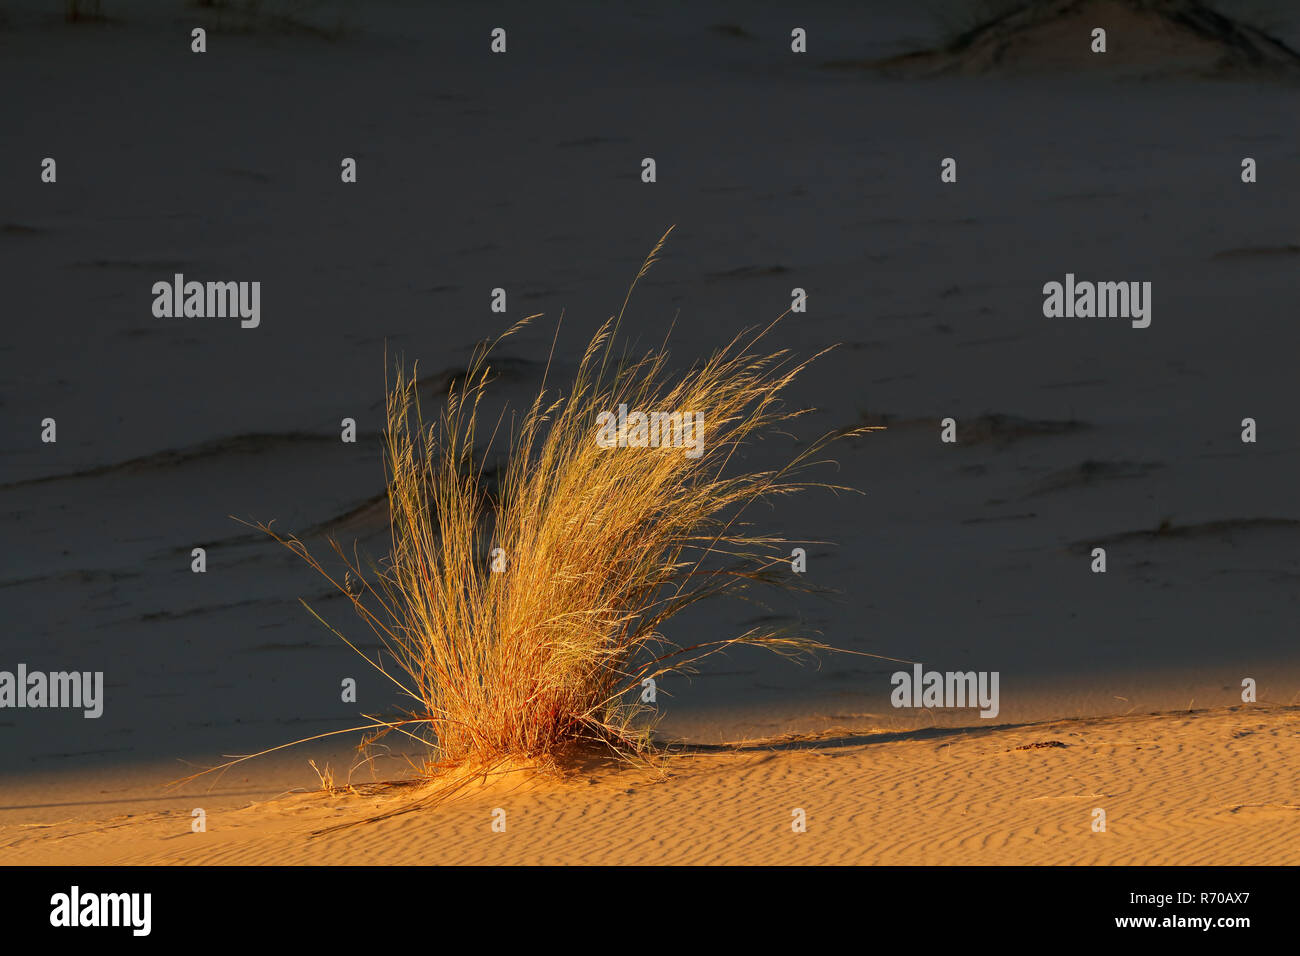 Sand dune with grass Stock Photo